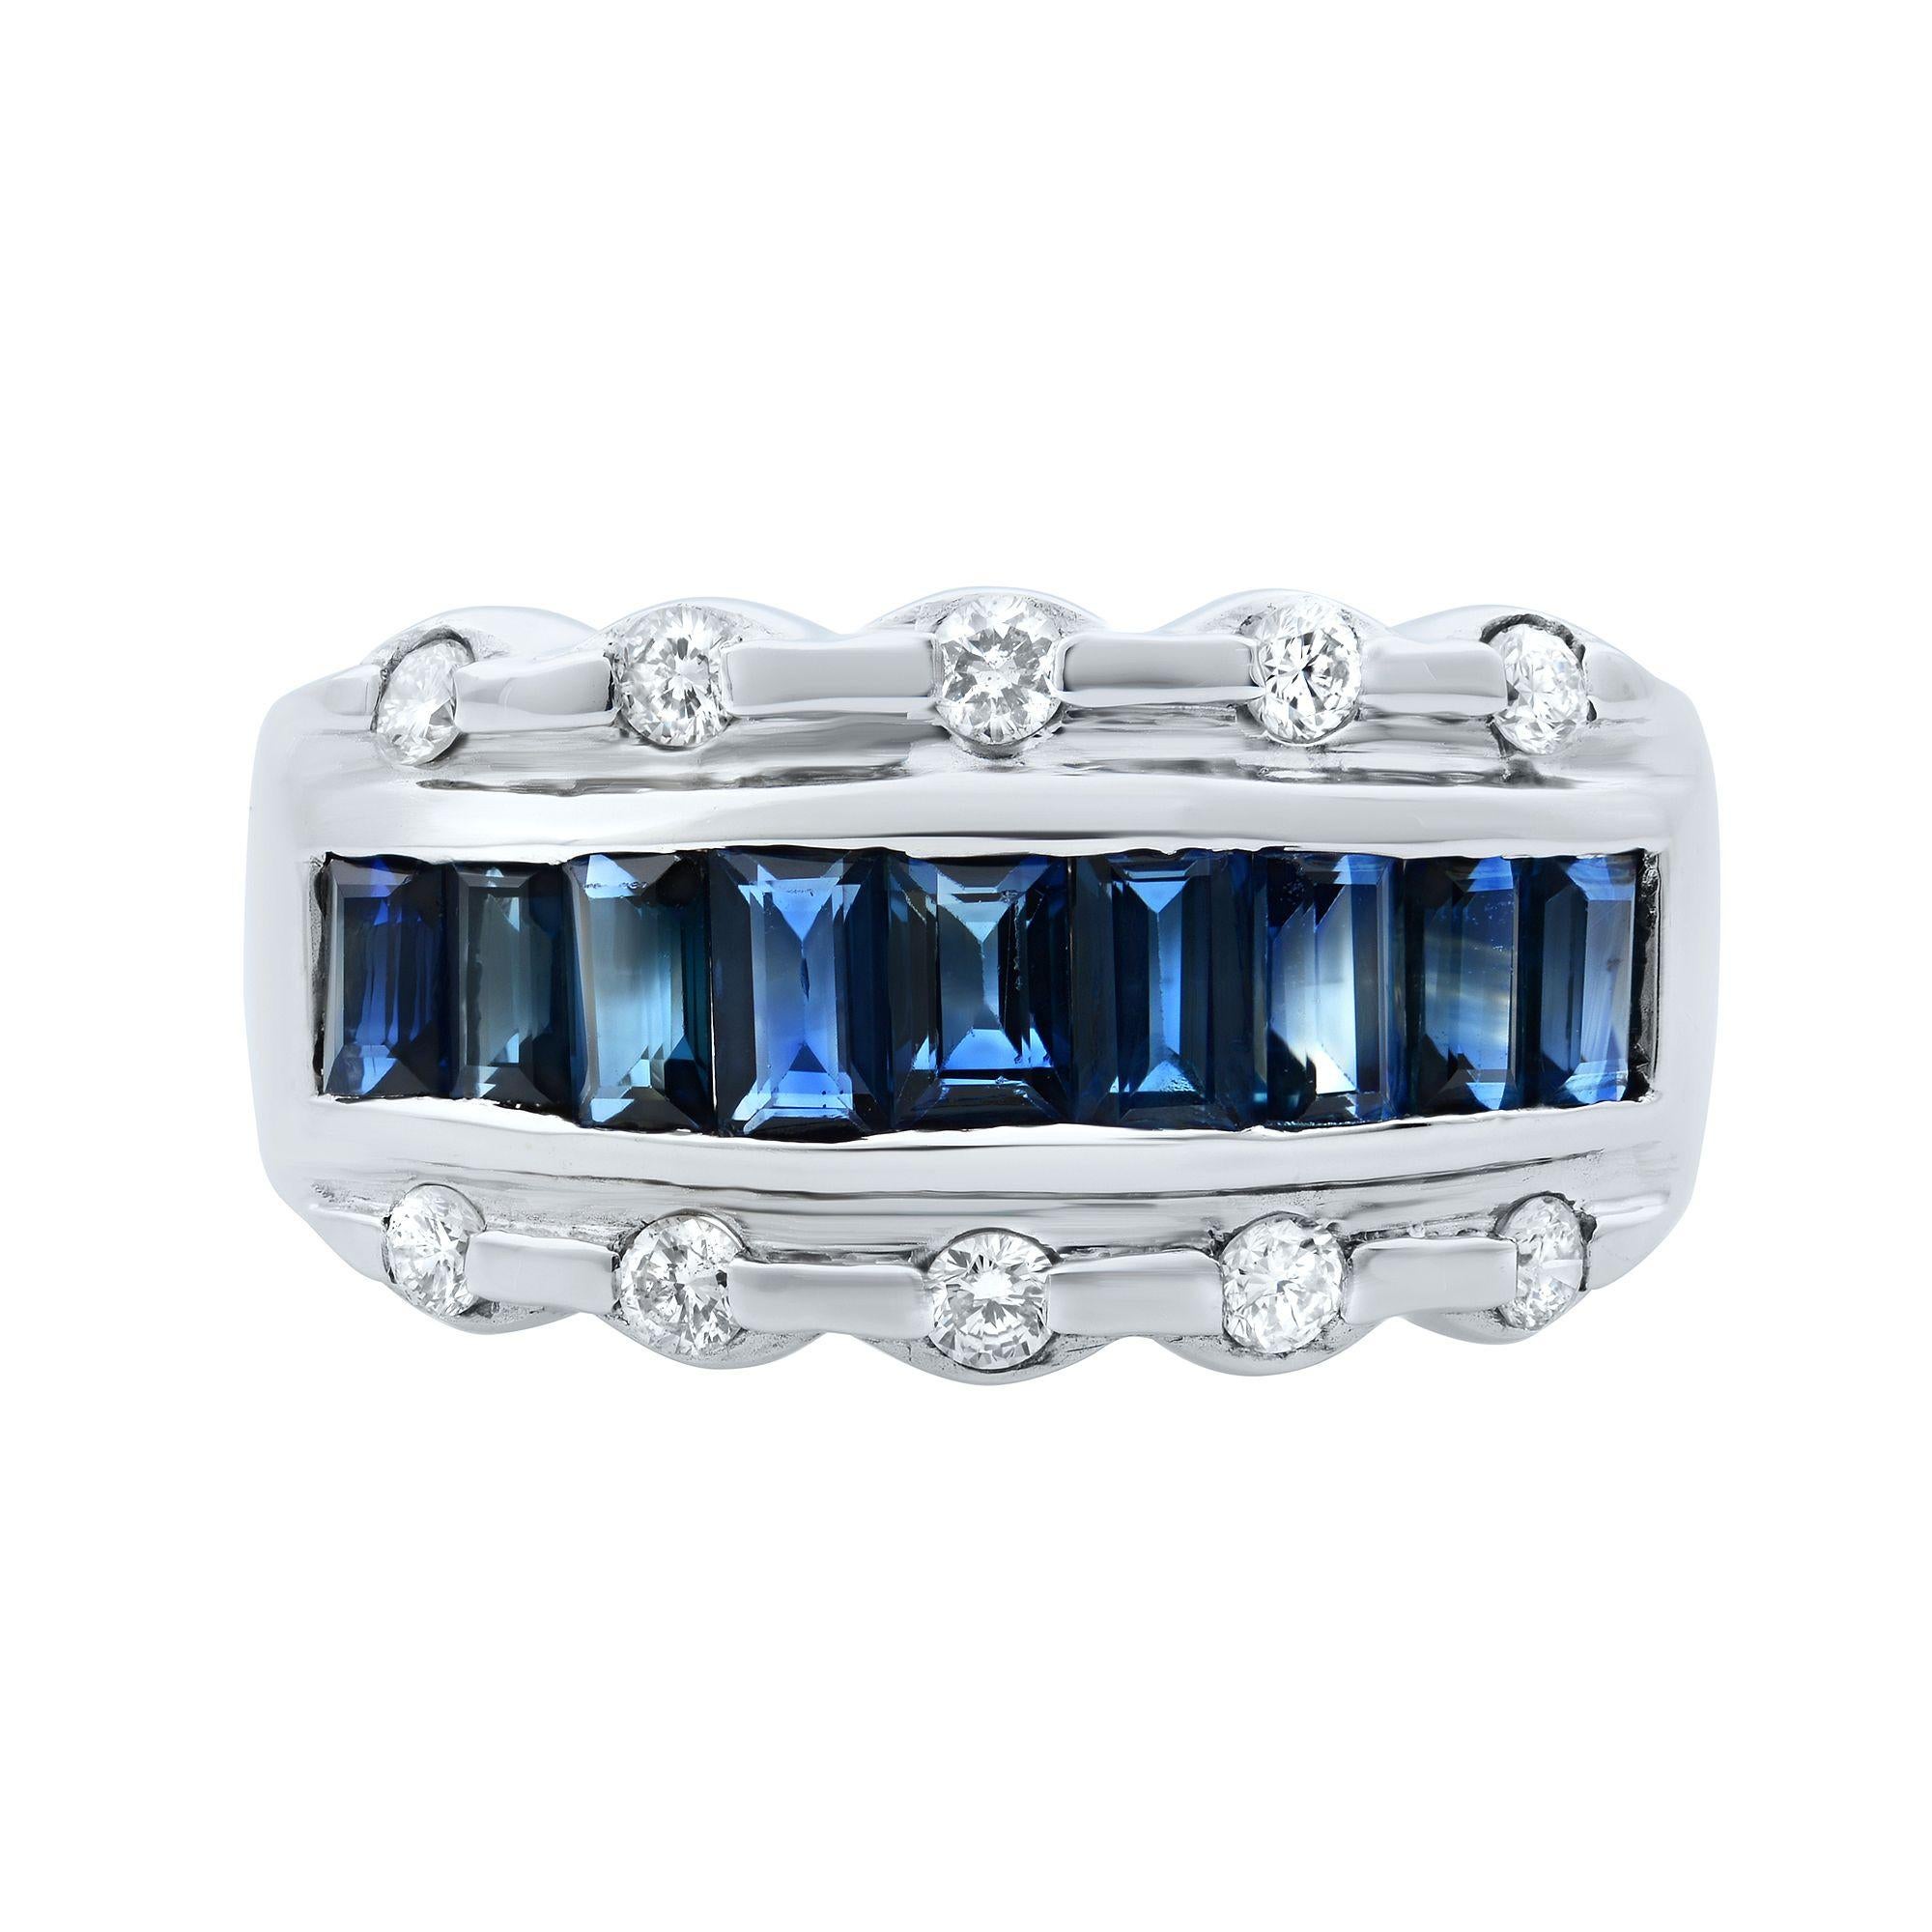 18k white gold triple row band ring with blue emerald cut sapphires set in the middle with round cut diamond on the side. Total carat weight of blue sapphires: 1.50 carat. Diamonds: 0.25 carat. Ring Size 8. Comes with a presentable gift box. 